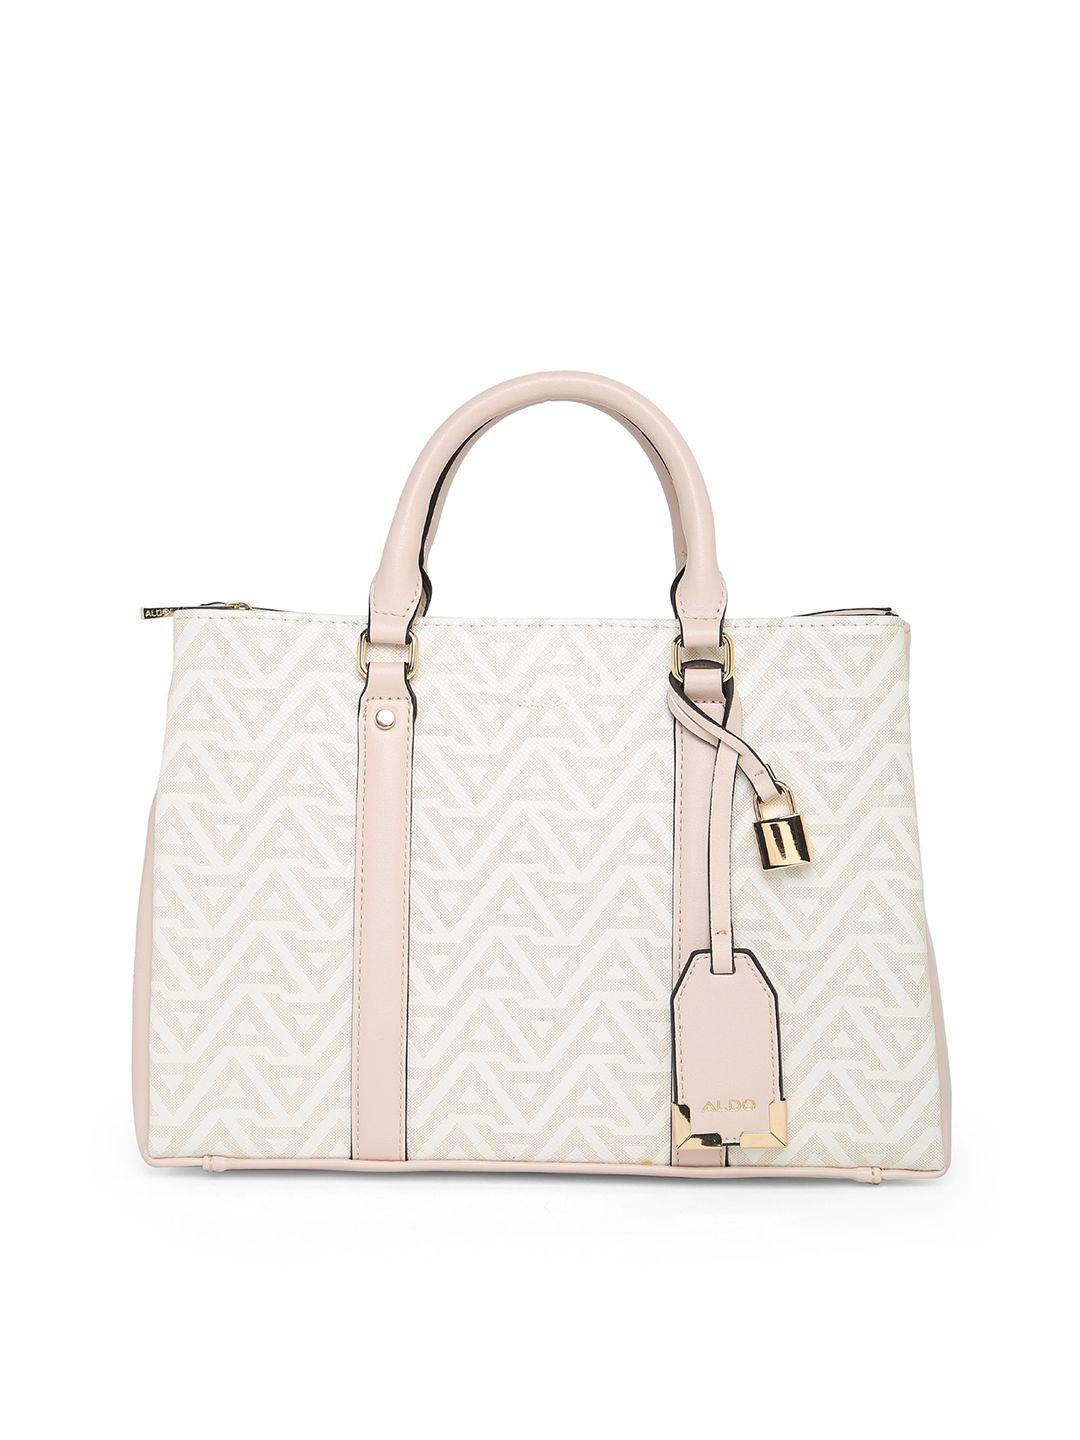 aldo printed structured handheld bag with quilted